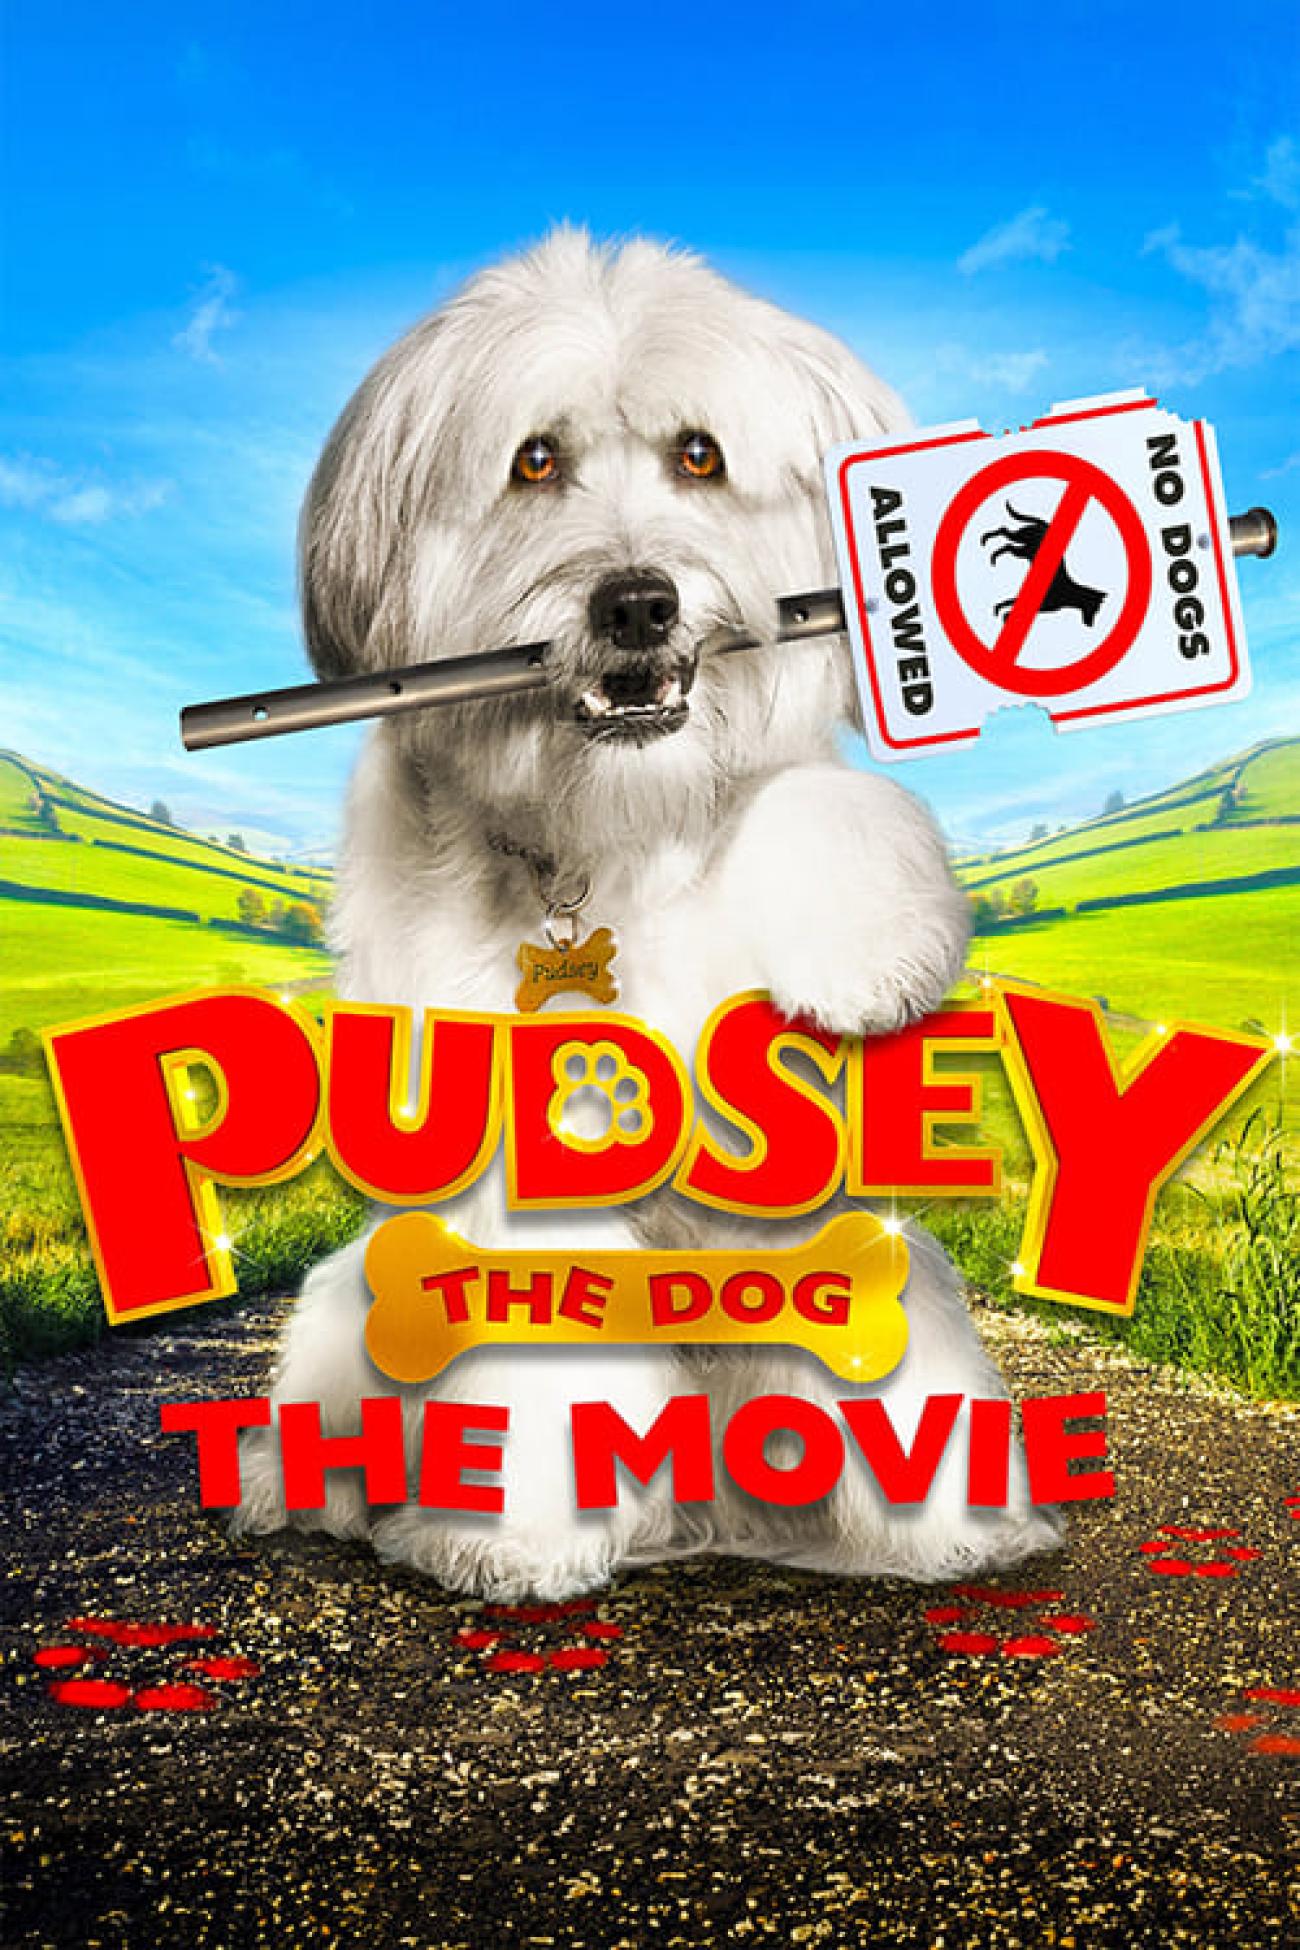 Watch Pudsey the Dog: The Movie Online For Free On 123movies